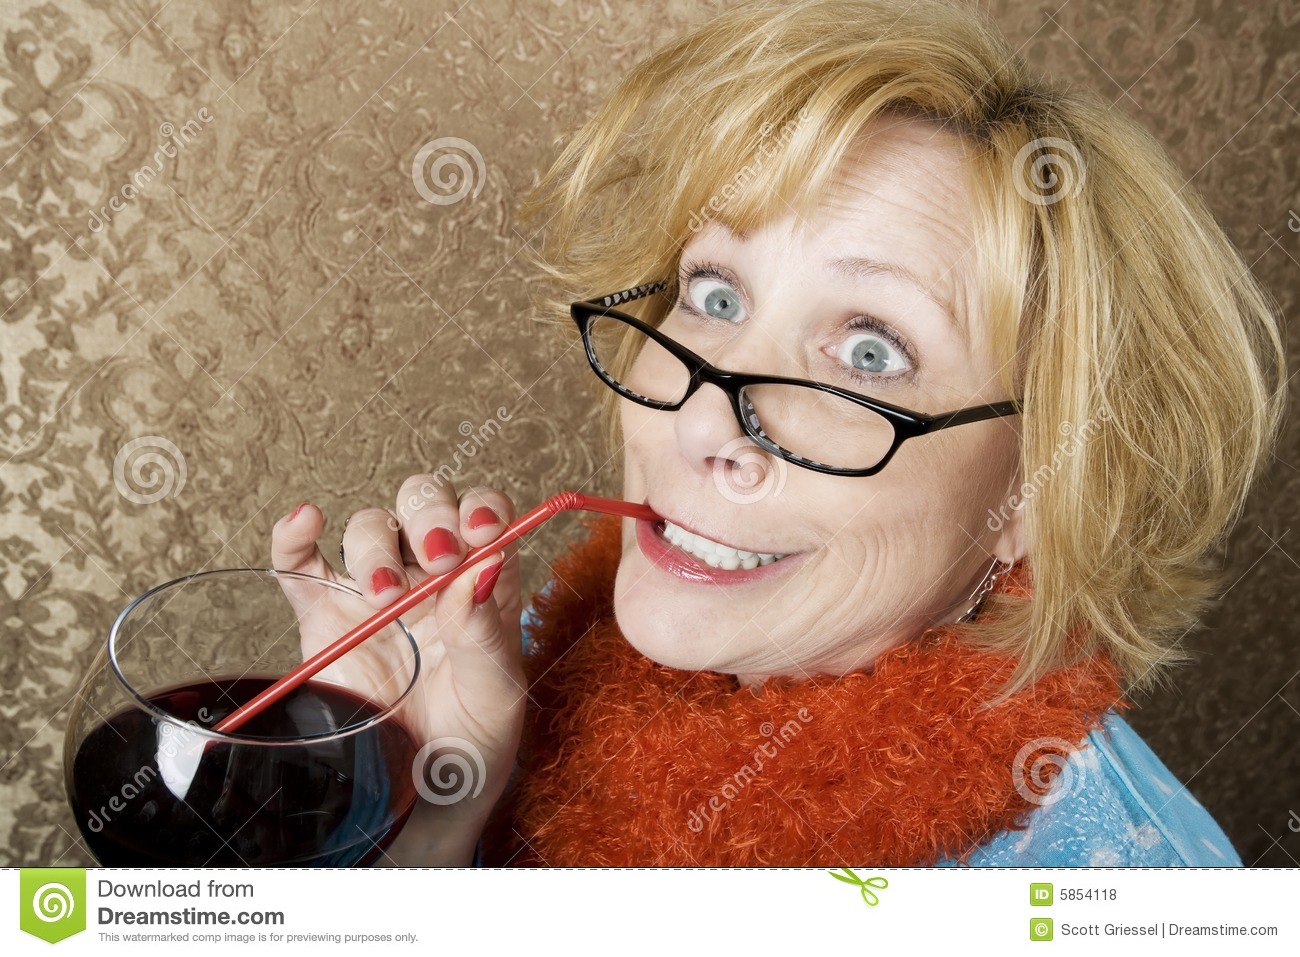 Crazy Woman Drinking Wine Royalty Free Stock Photos   Image  5854118